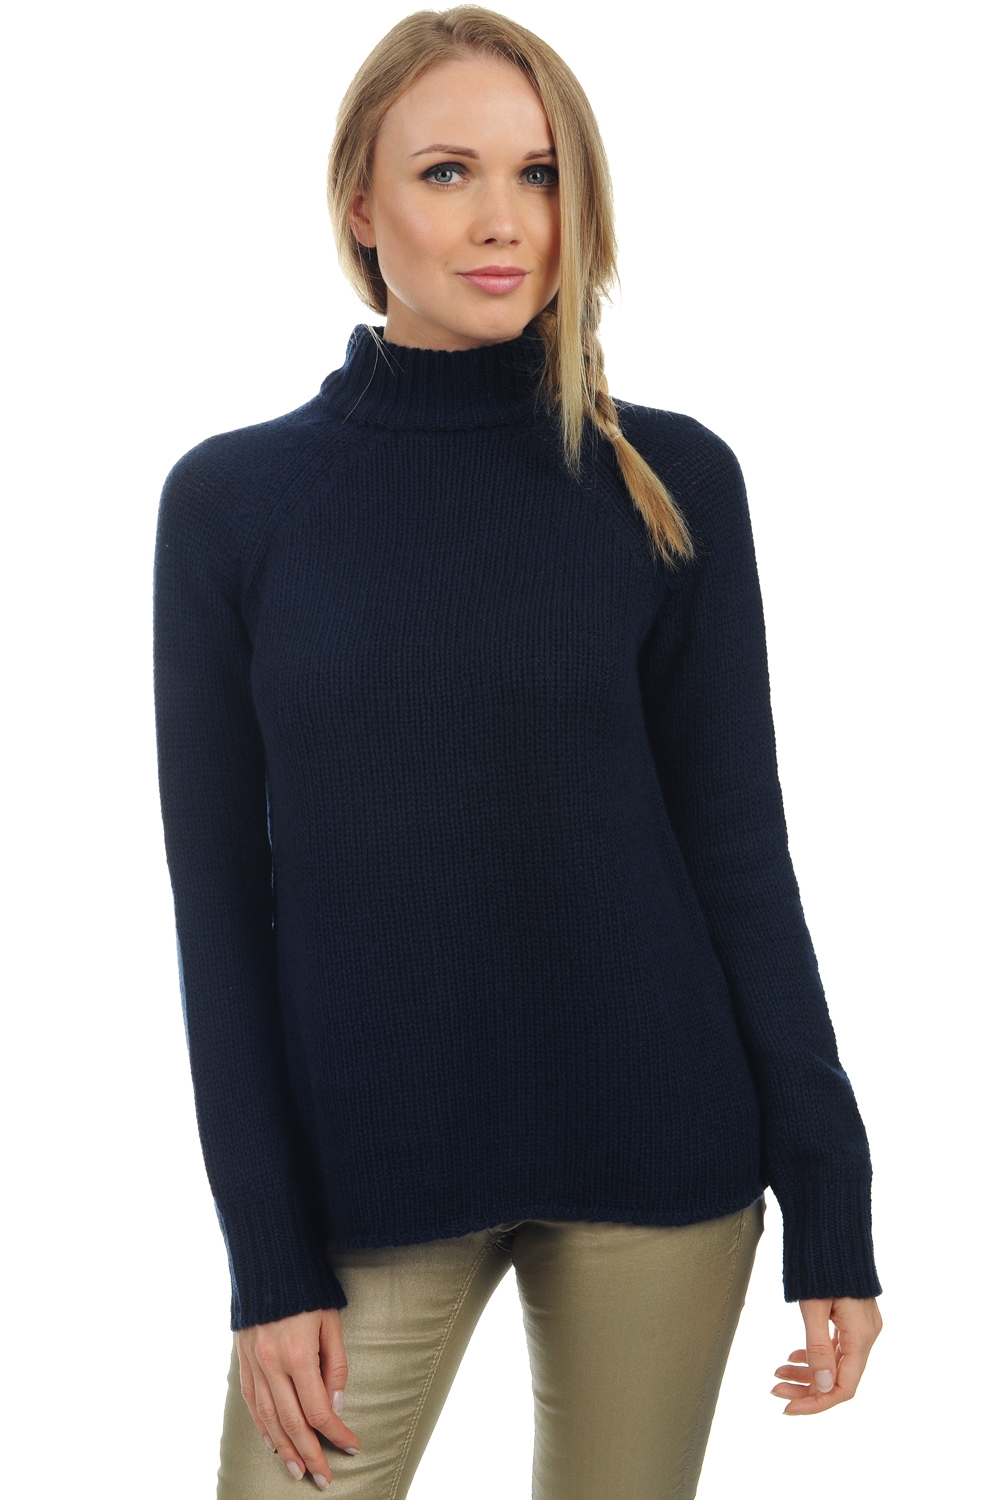 Cachemire pull femme col roule louisa marine fonce l